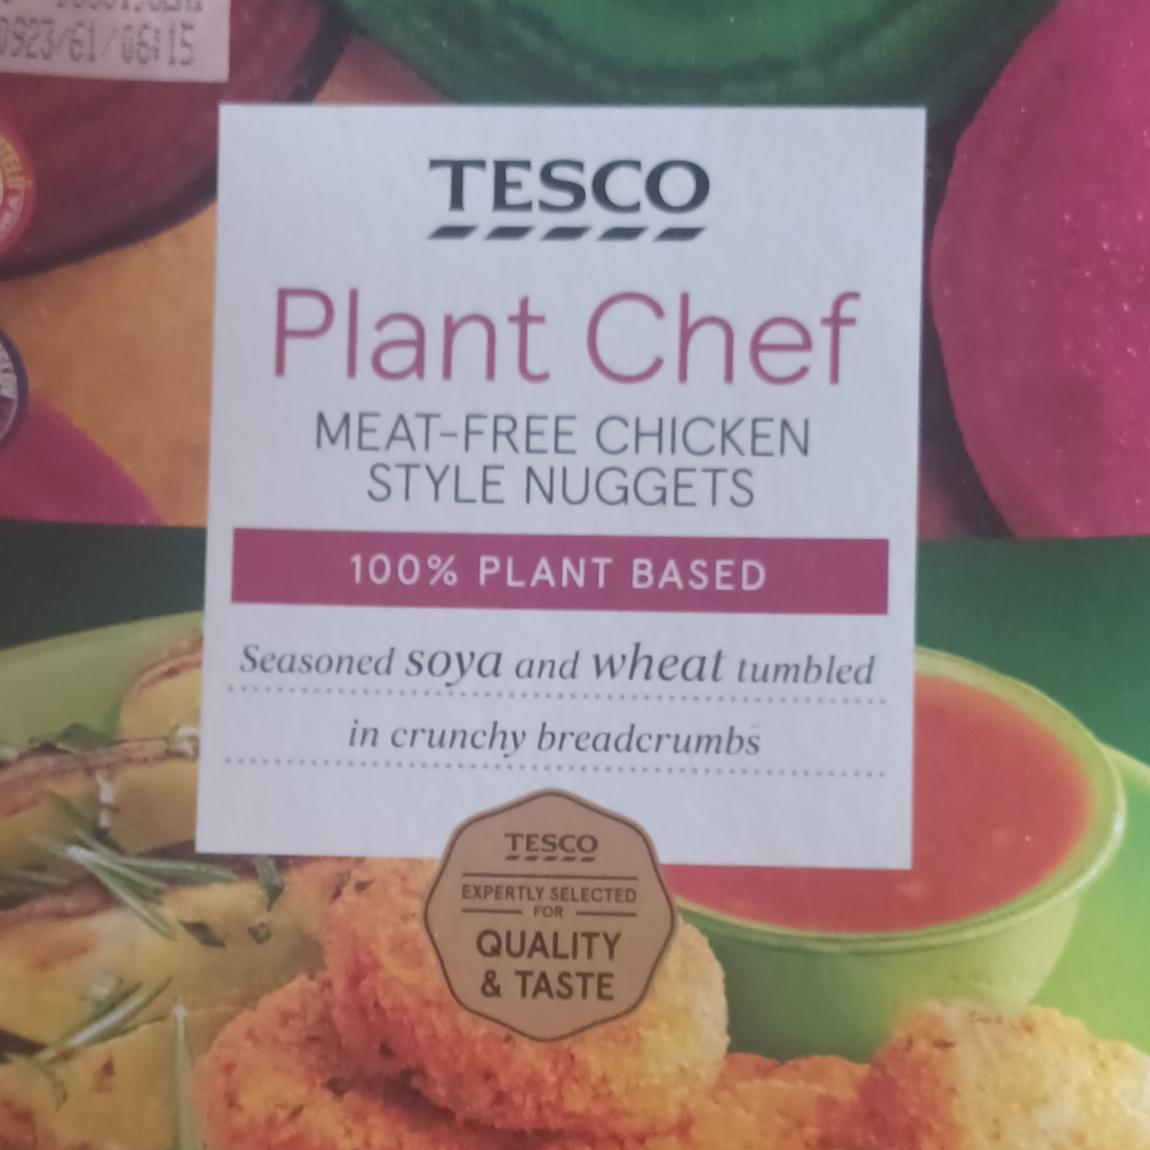 Képek - Plant chef meat-free chicken style nuggets Tesco